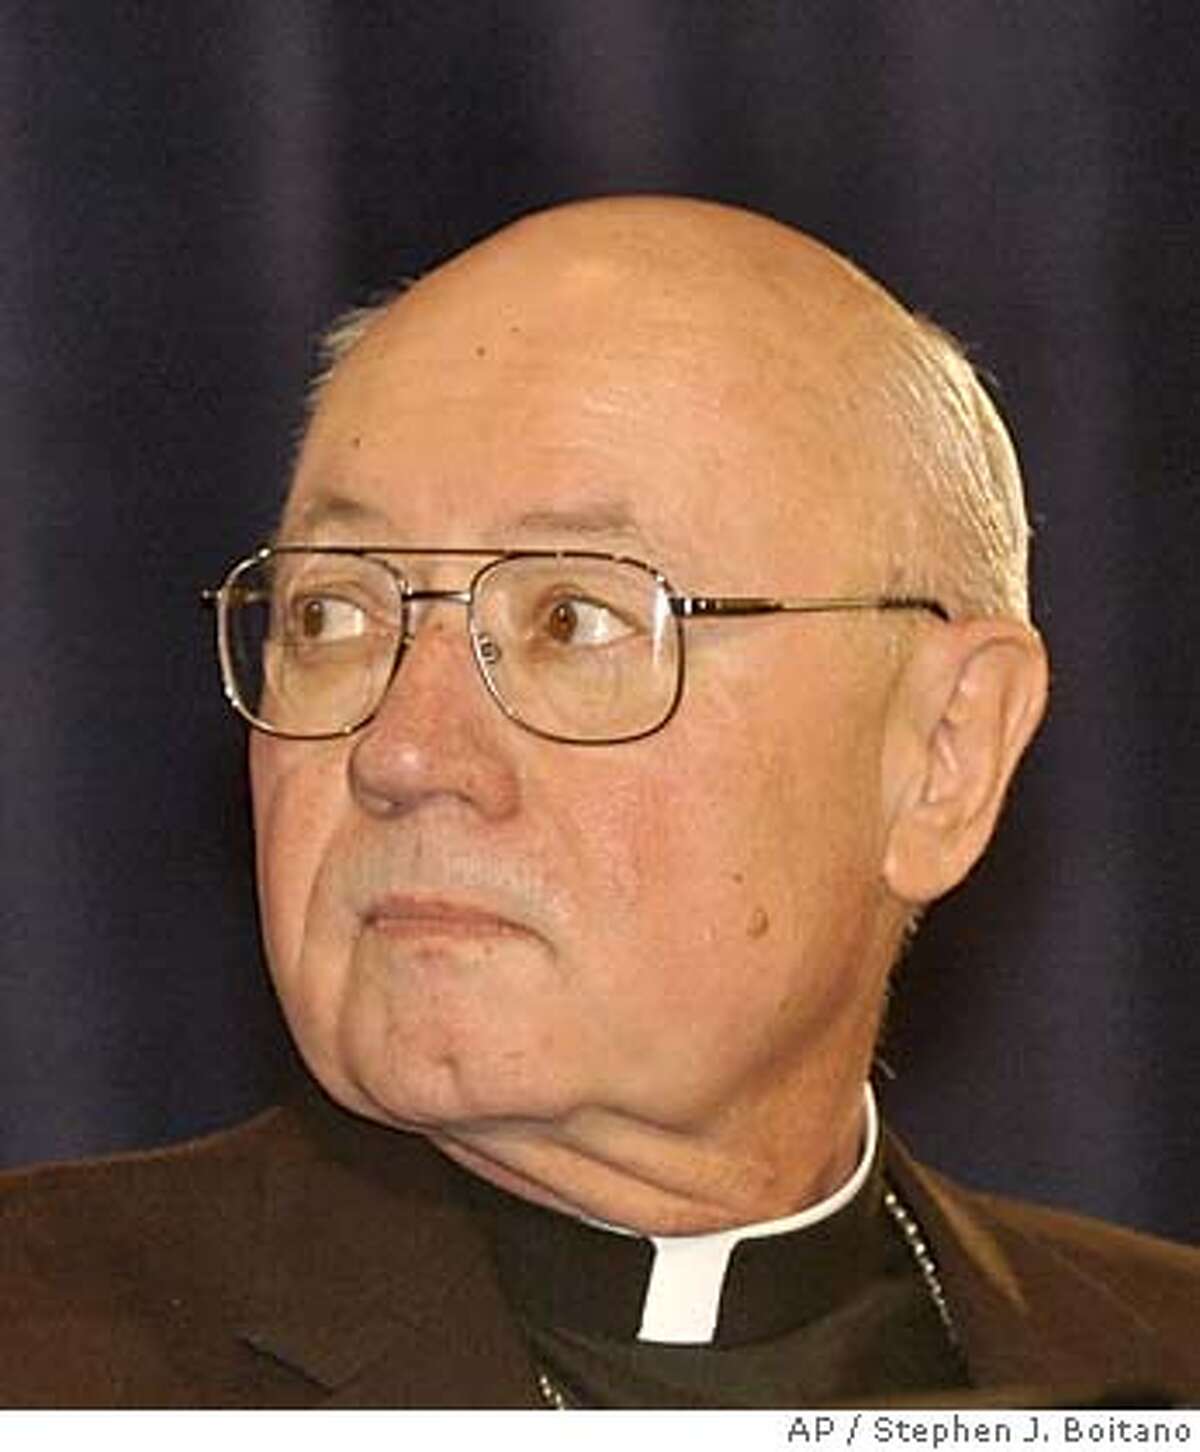 Bishop William Skylstad of Spokane, Wash., the incoming president of the U.S. Conference of Catholic Bishops during the bishops annual meeting in Washington, Monday, Nov. 15, 2004. Skylstad was elected overwhelmingly to succeed Bishop Wilton Gregory of Belleville, Ill., who is ending his three-year term after leading the conference through the height of the abuse crisis. (AP Photo/Stephen J. Boitano) Nation#MainNews#Chronicle#11/16/2004#ALL#5star##0422468394